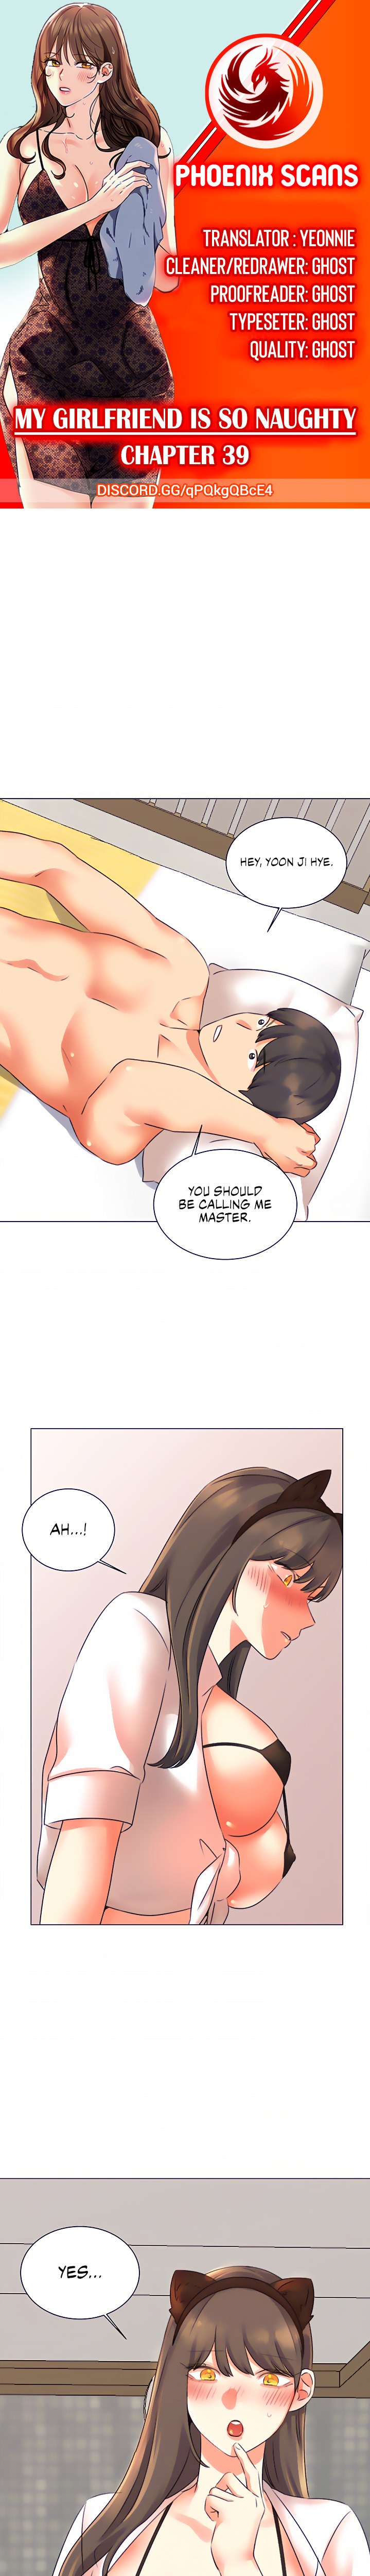 My girlfriend is so naughty Chapter 39 - Page 1